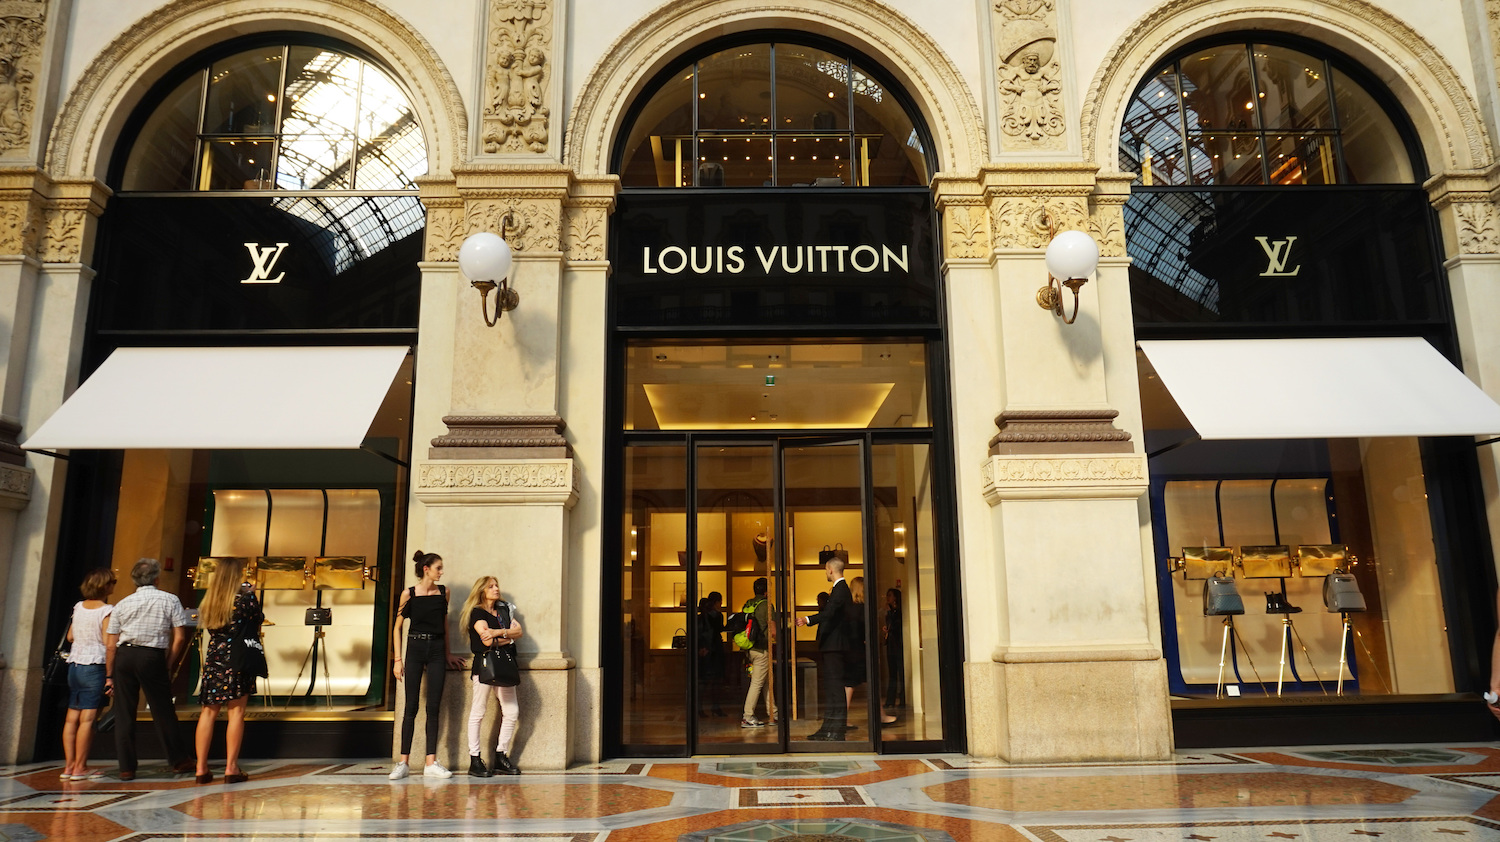 Louis Vuitton Owner LVMH Is Launching A Blockchain To Track Luxury Goods